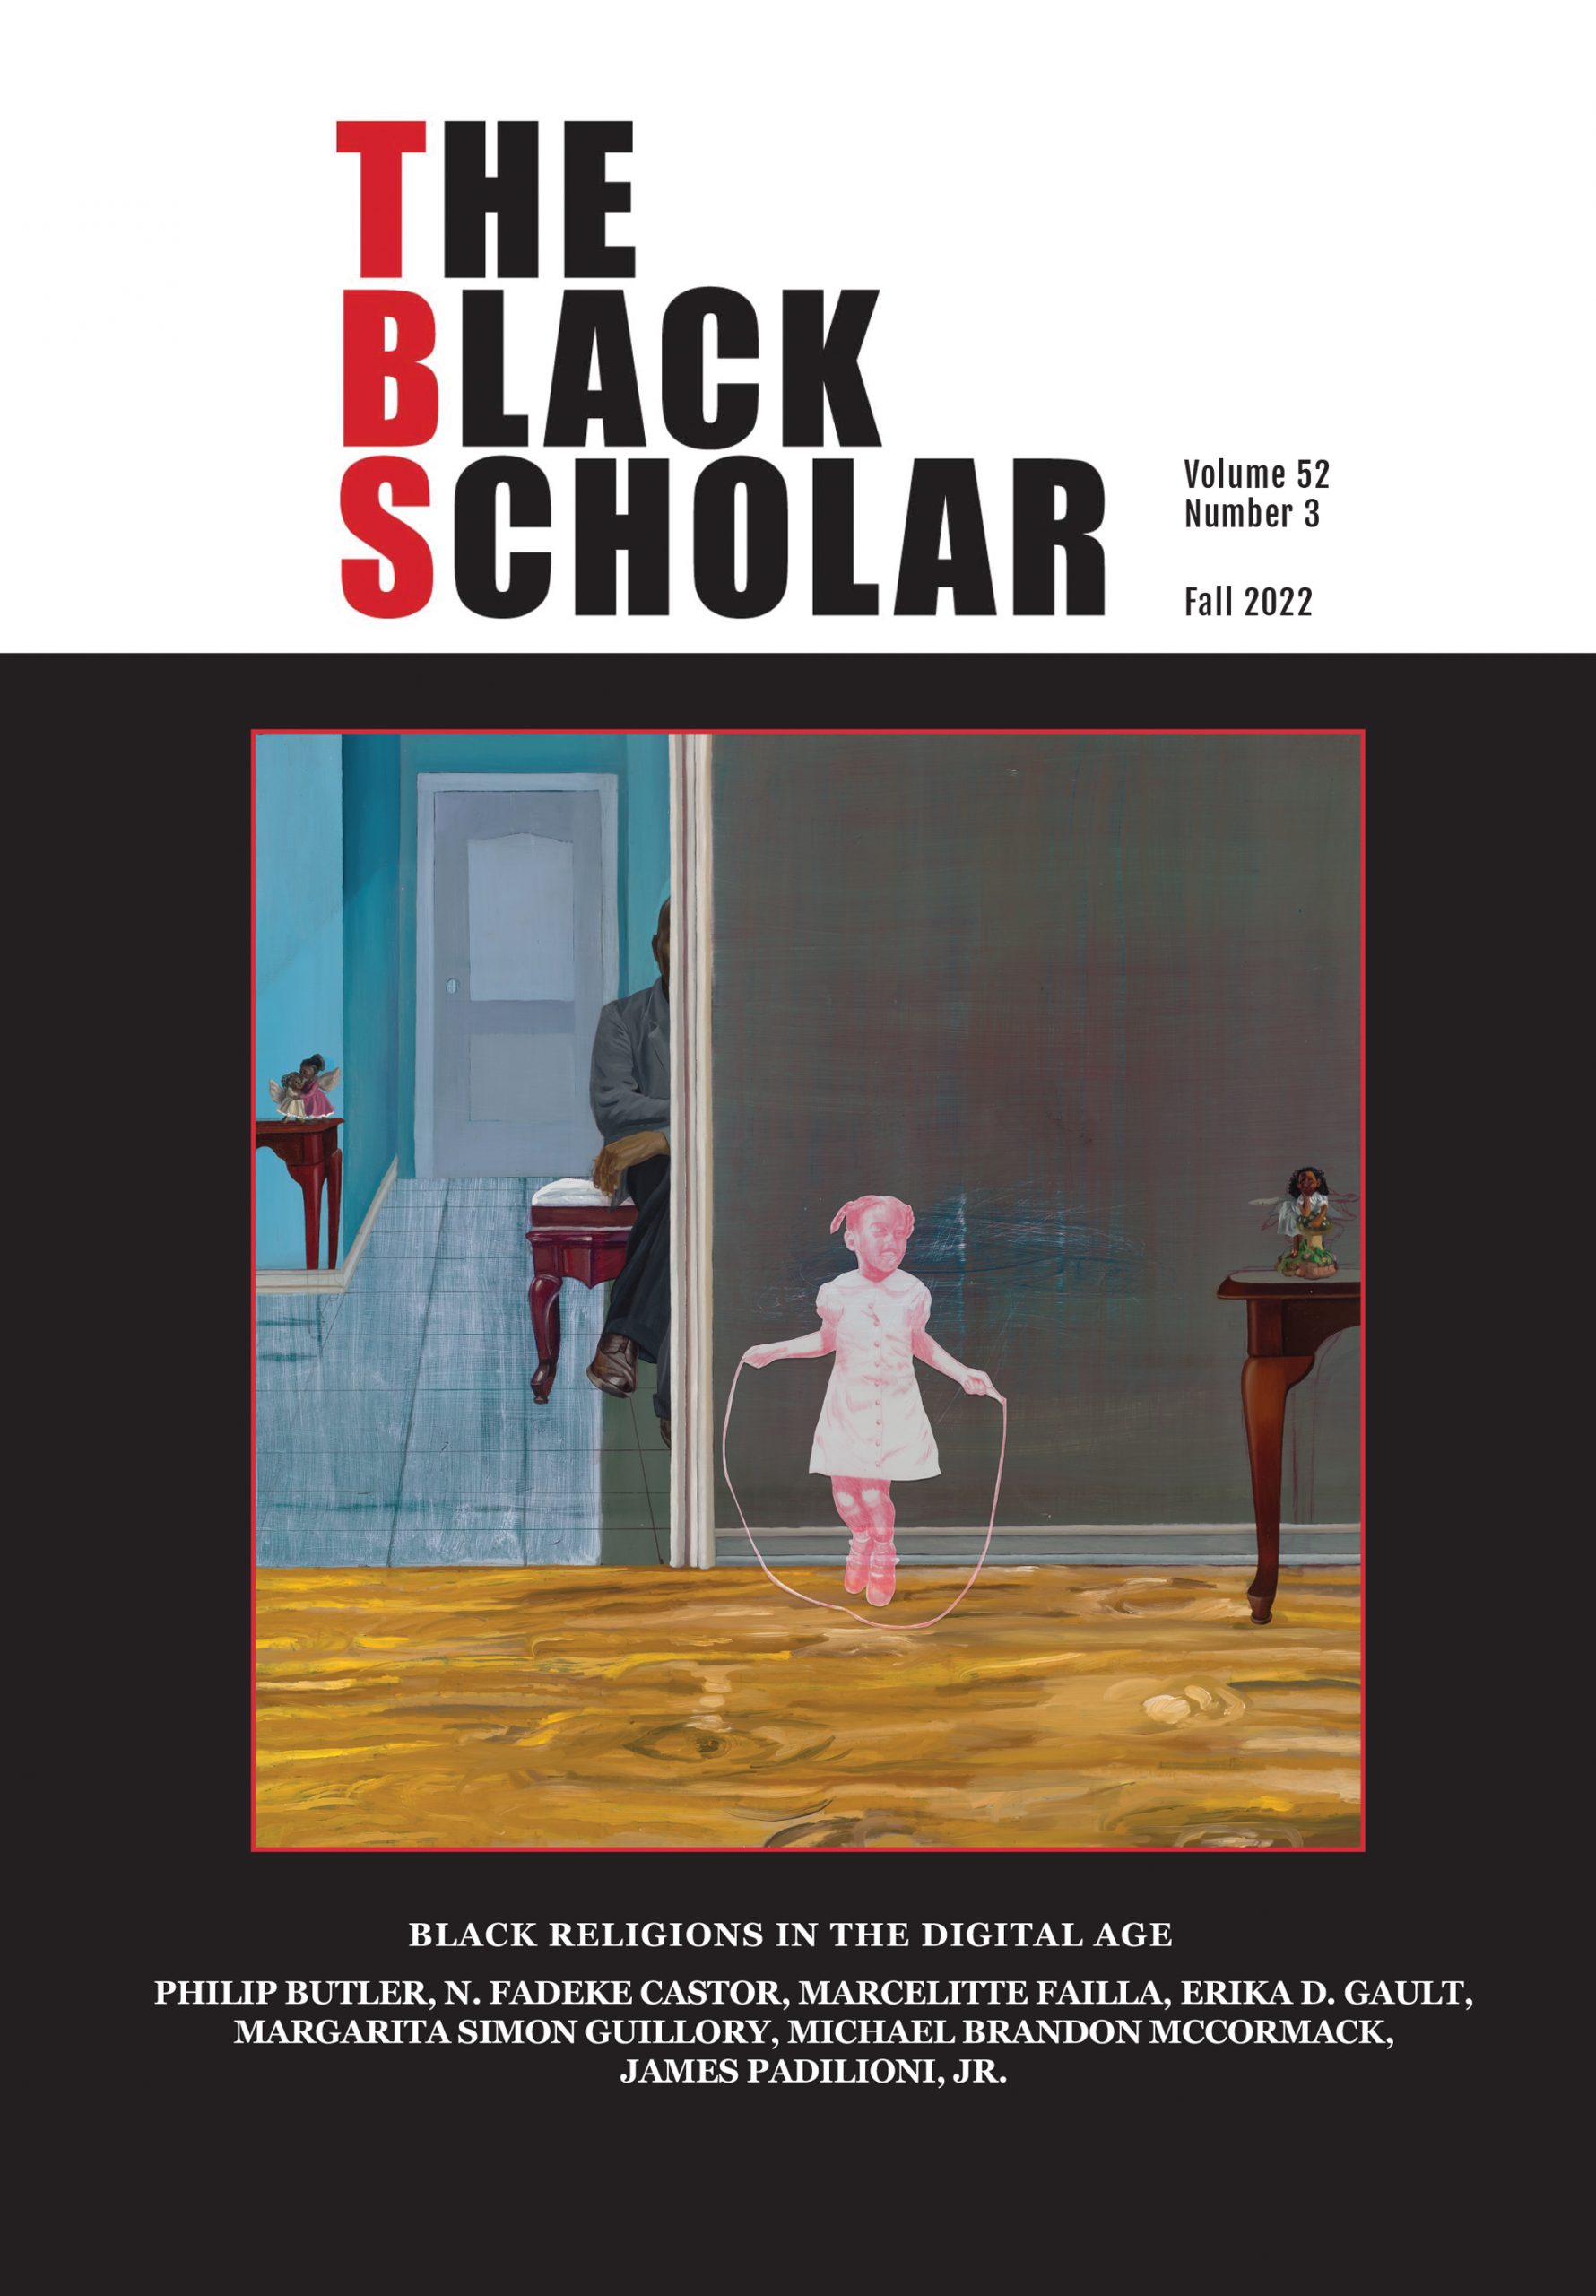 Cover of The Black Scholar, Vol 52 Number 3. Features an art piece of a young girl jumping rope inside a house.